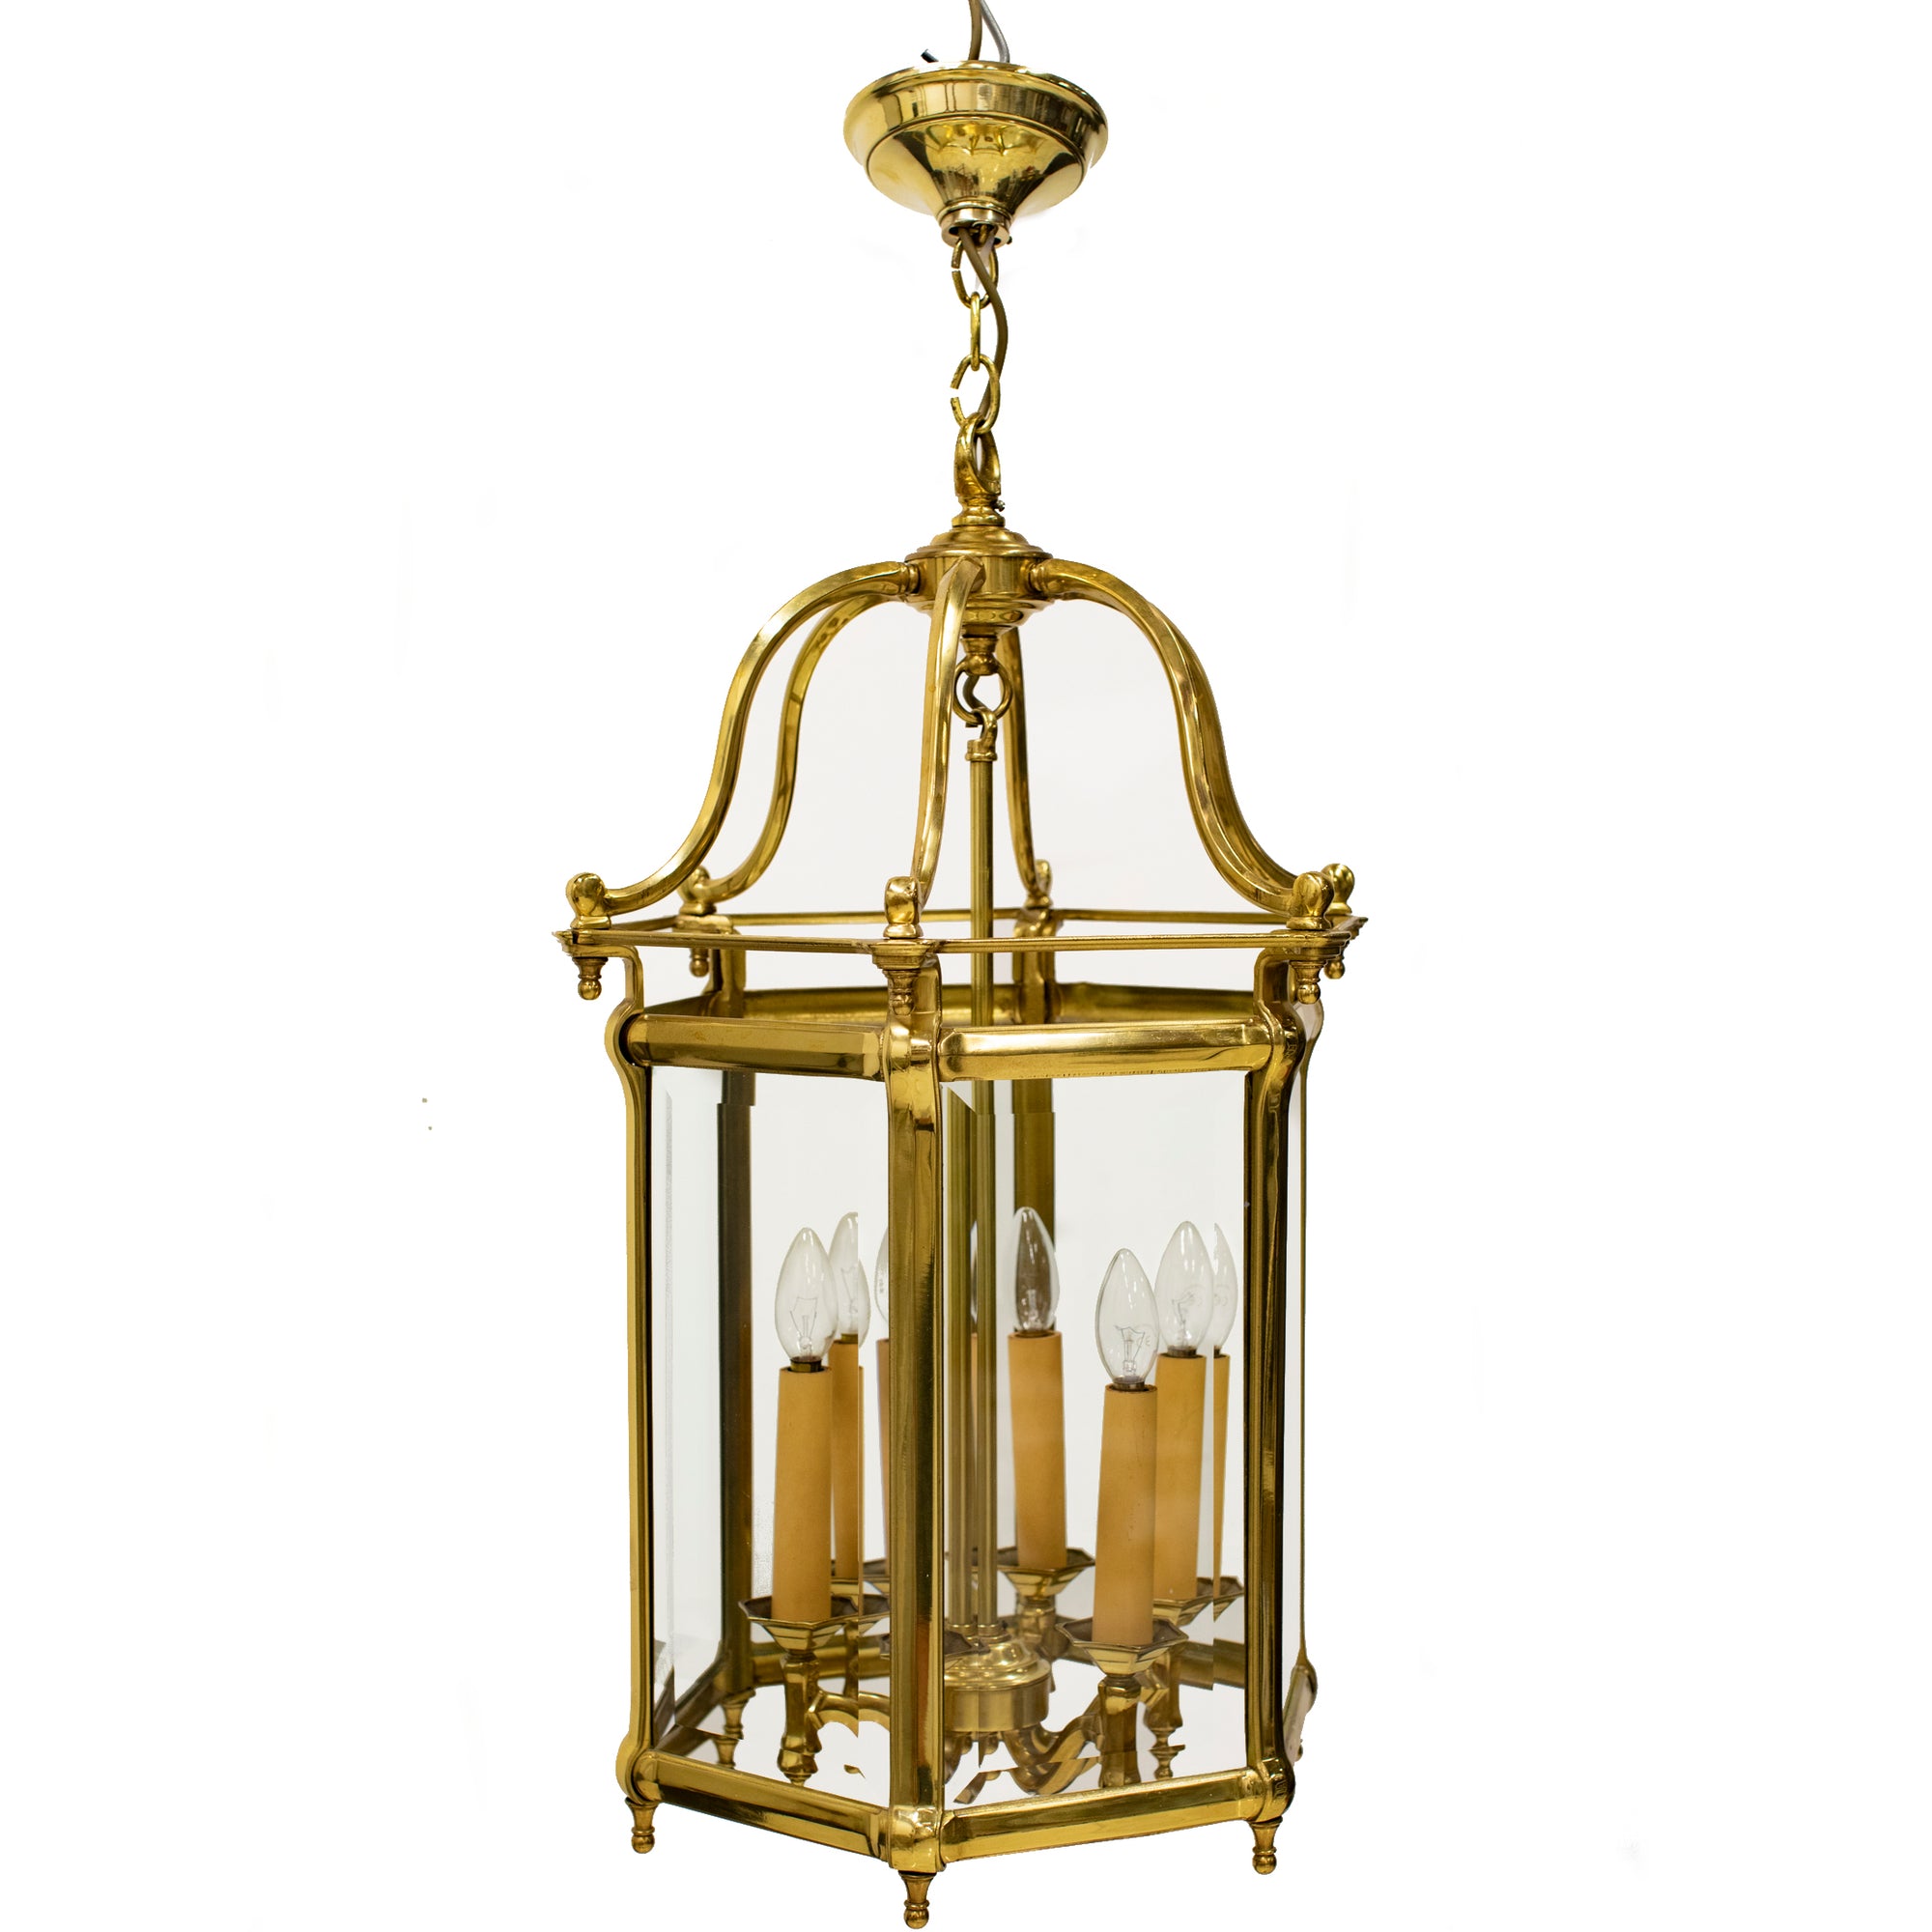 | OLD LISTING | Hexagonal Polished Brass Hanging Lantern | The Architectural Forum